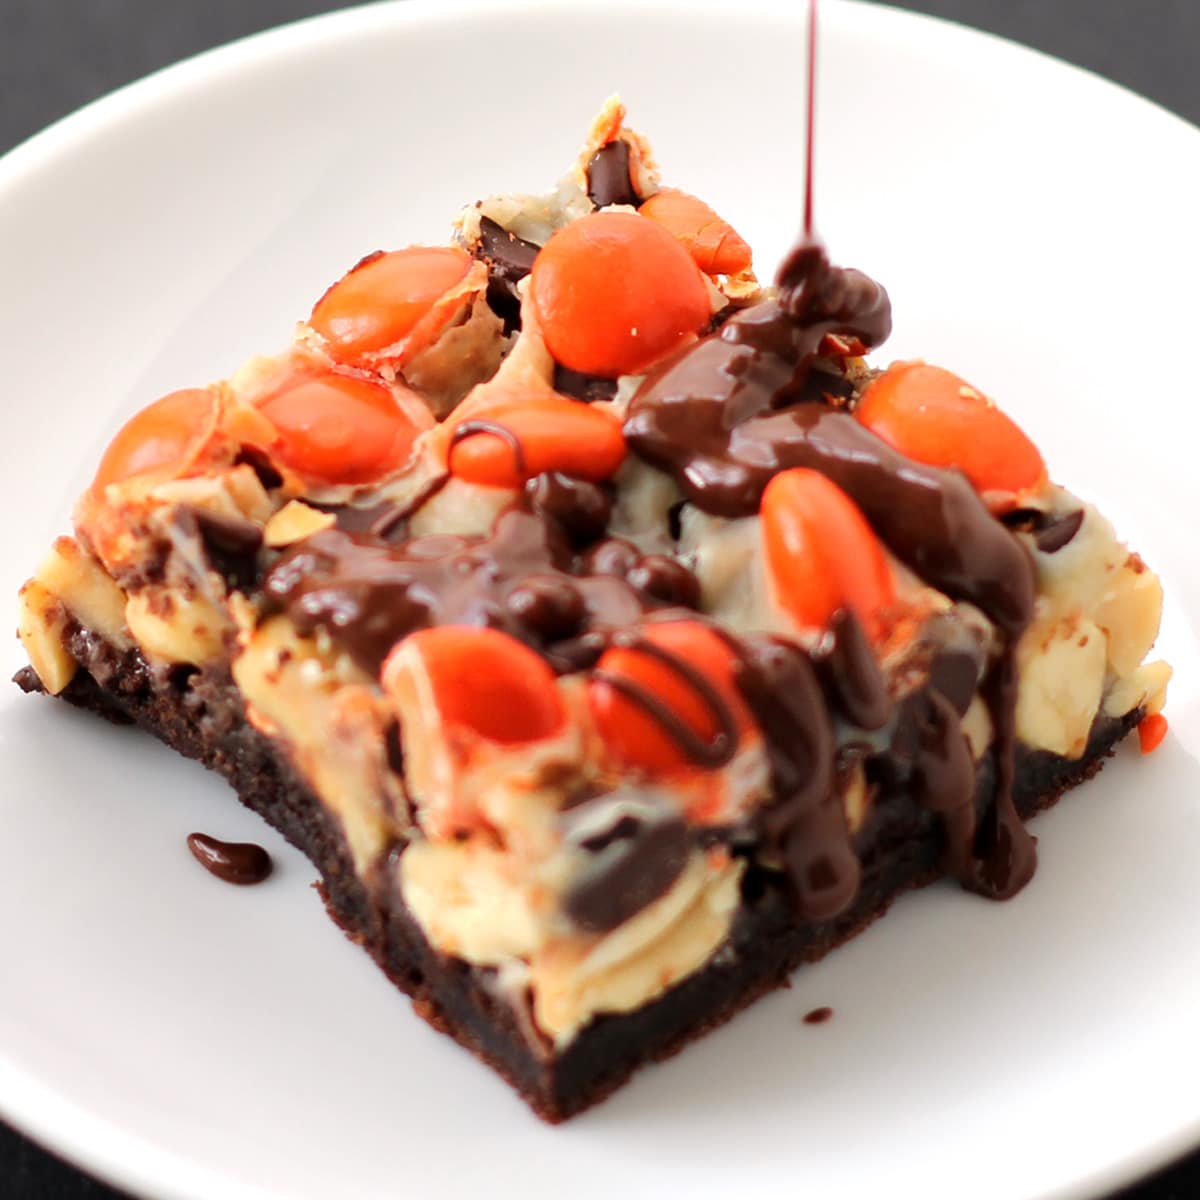 Drizzling chocolate peanut butter glaze over Reese's pieces topped magic bars.